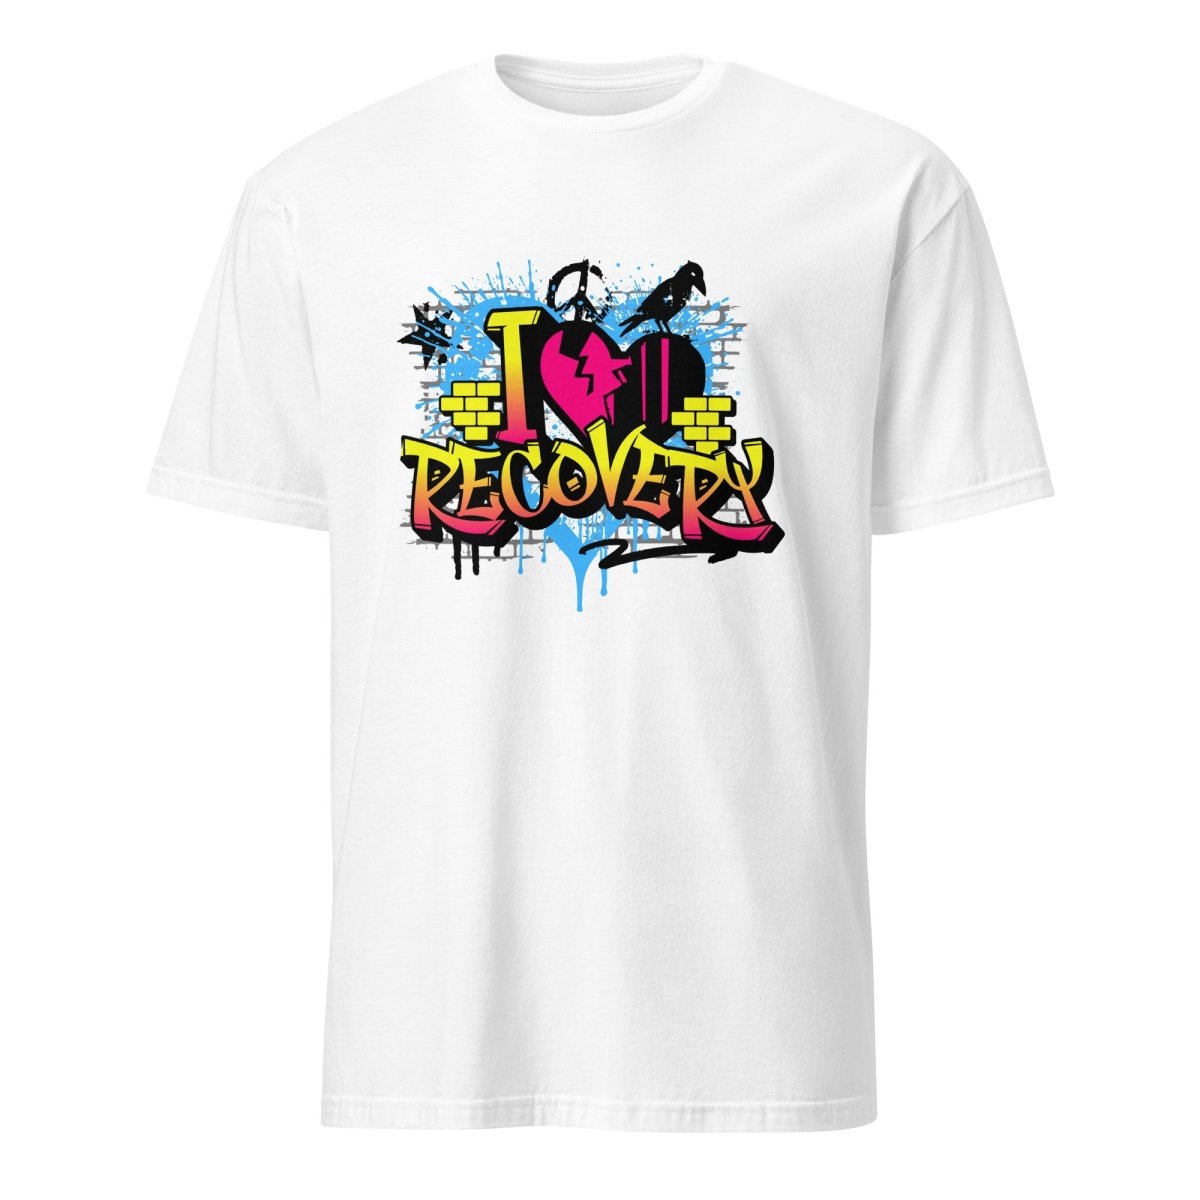 I Heart Recovery - Essential Graffiti Tee - White / S | Sobervation